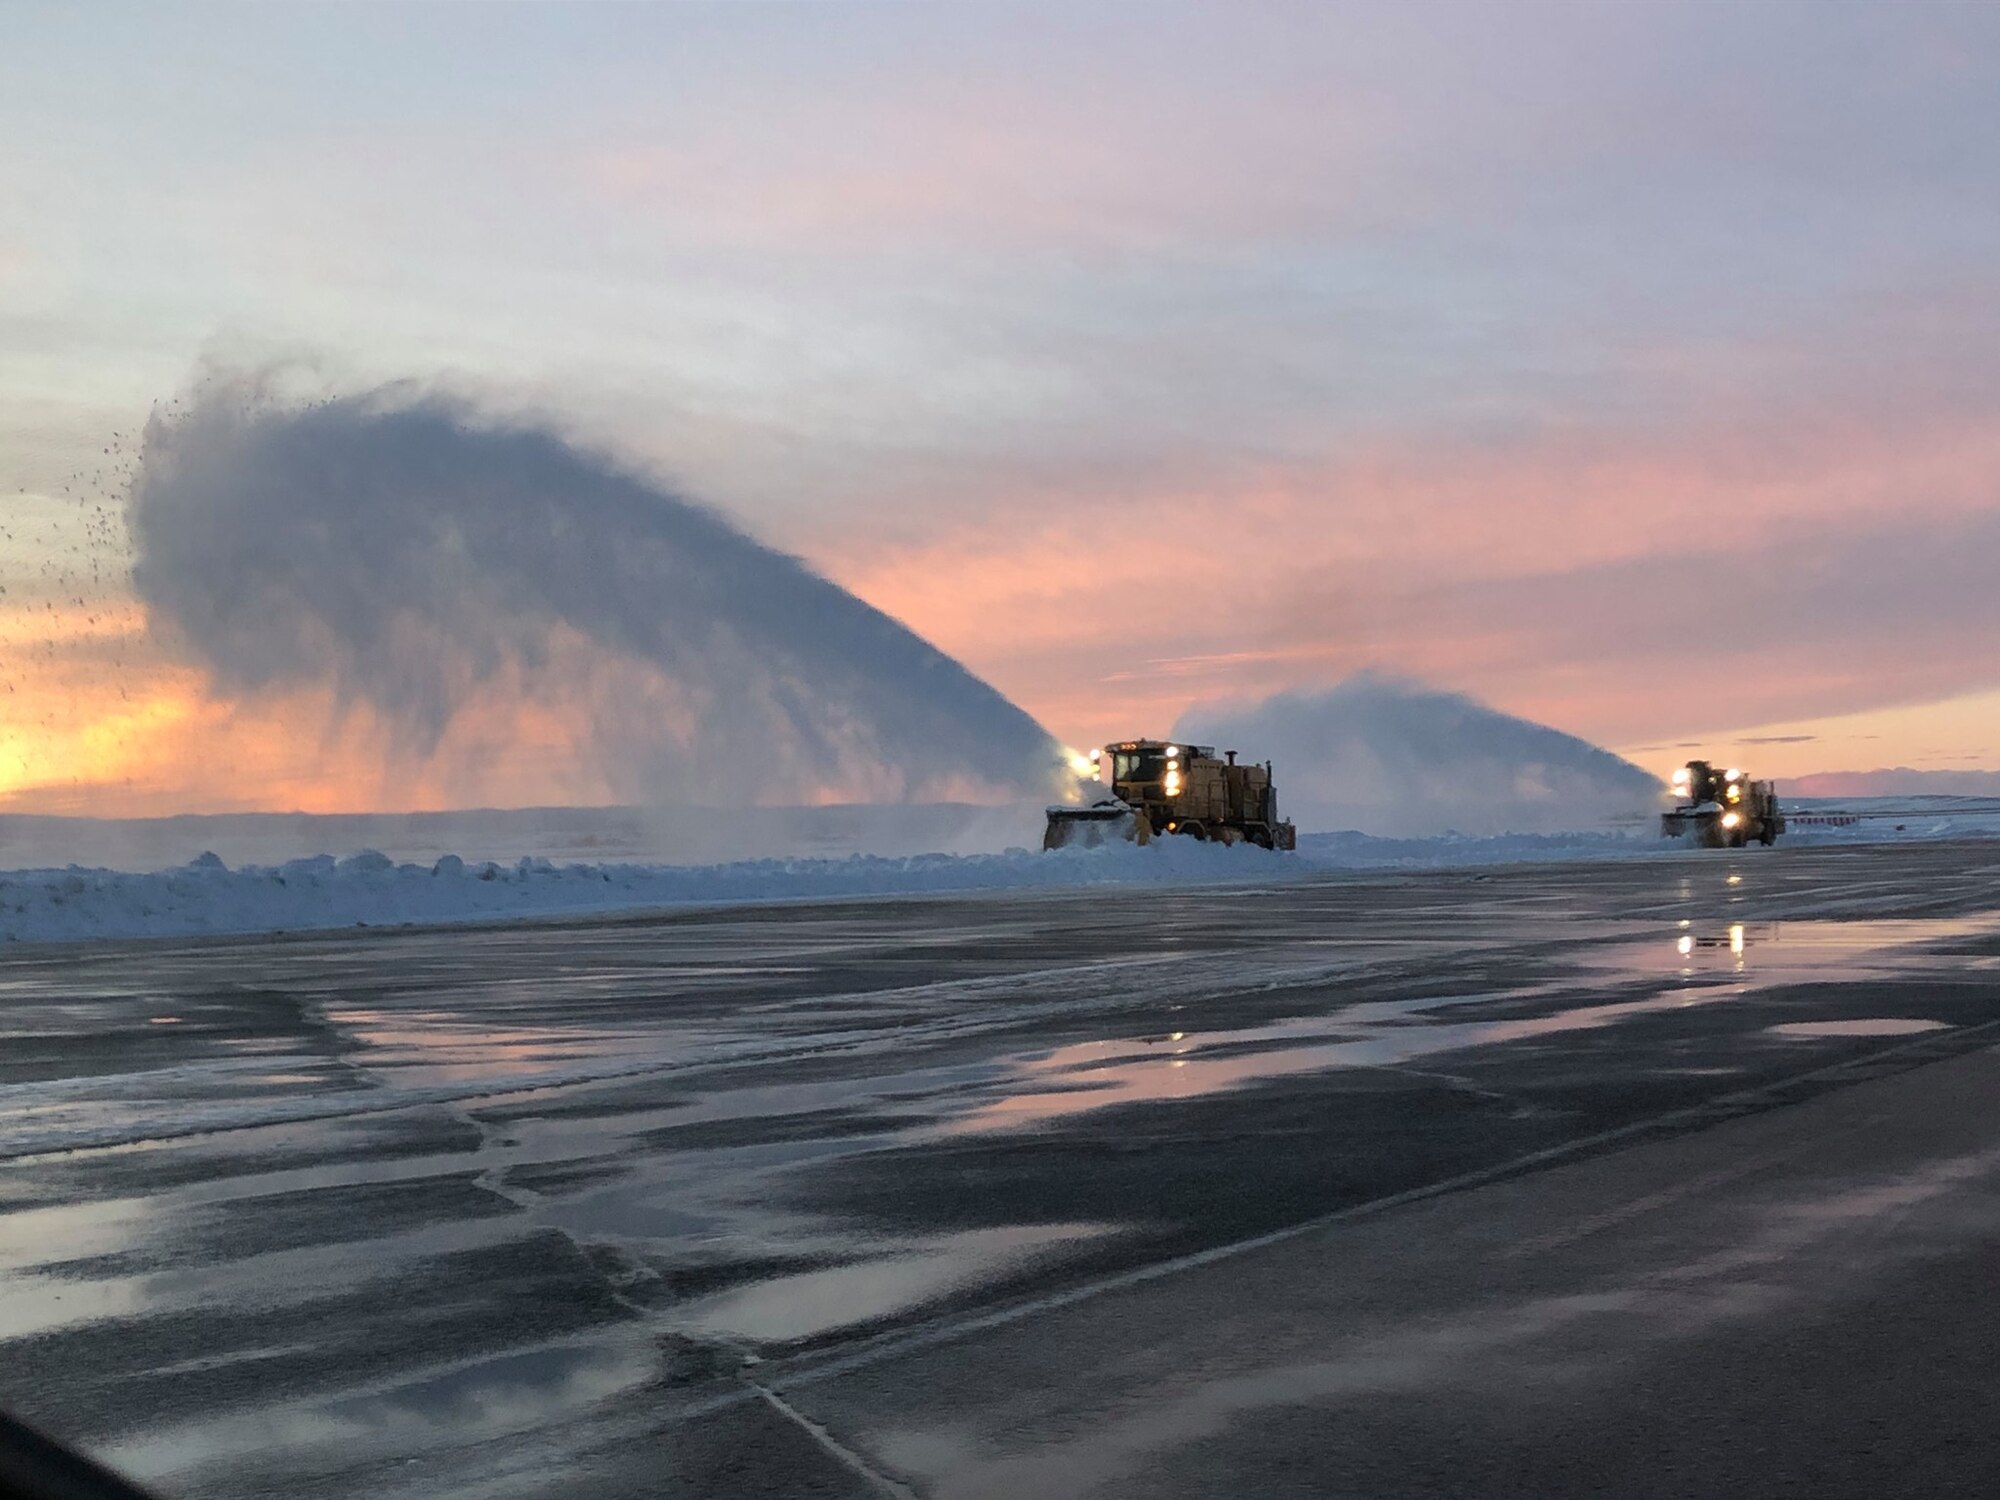 Two snow plows remove snow from a flightline during Sunset at Ellsworth Air Force Base.